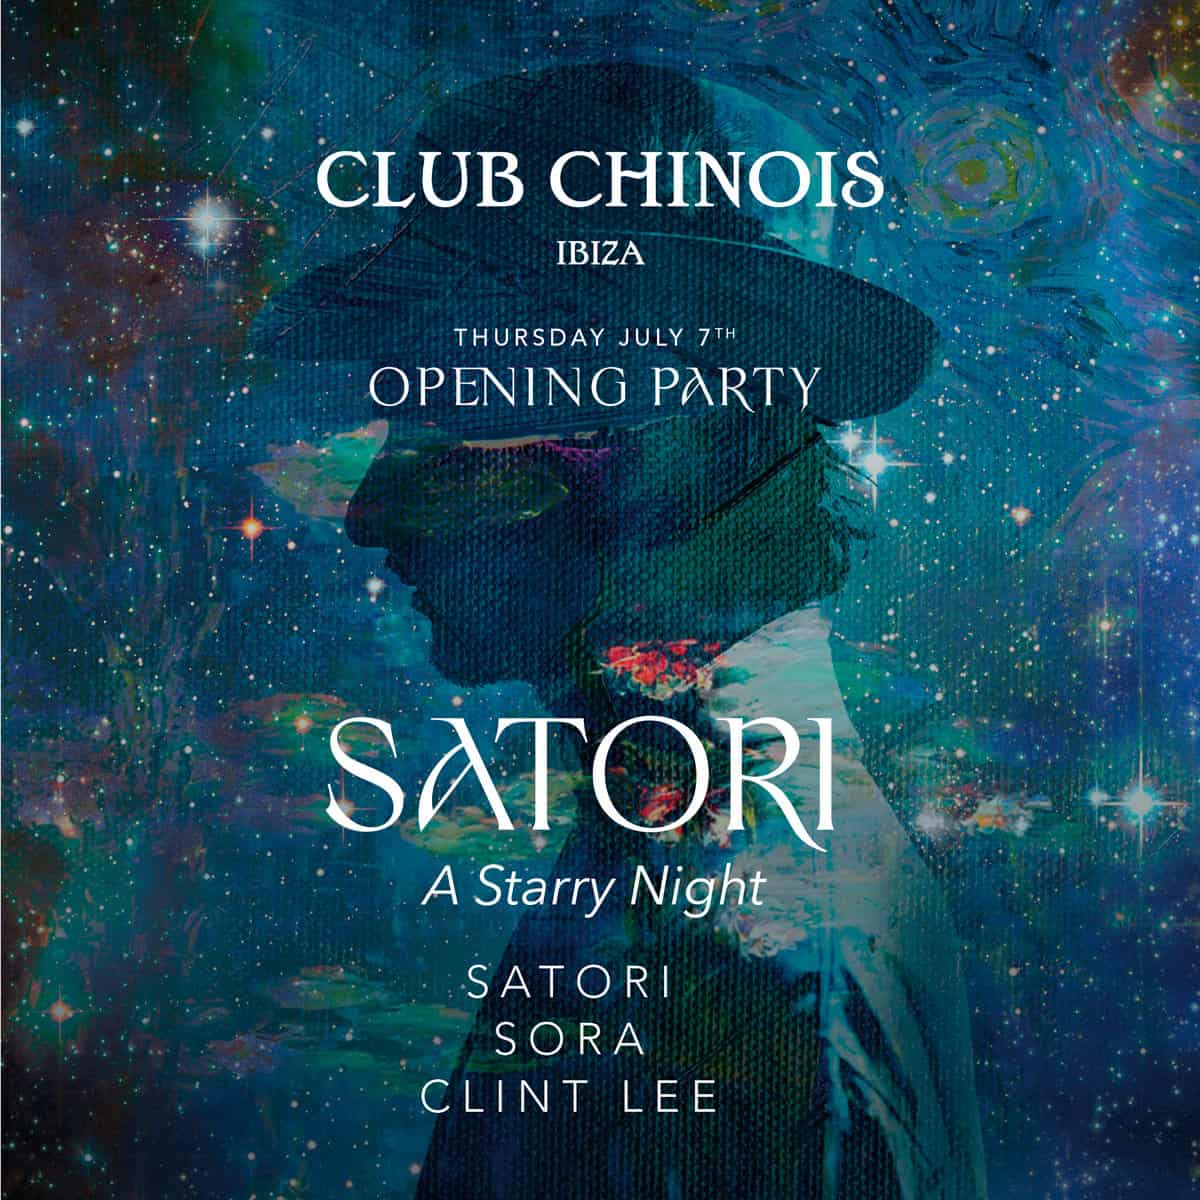 Opening of A Starry Night with Satori at Club Chinois Fiestas Ibiza